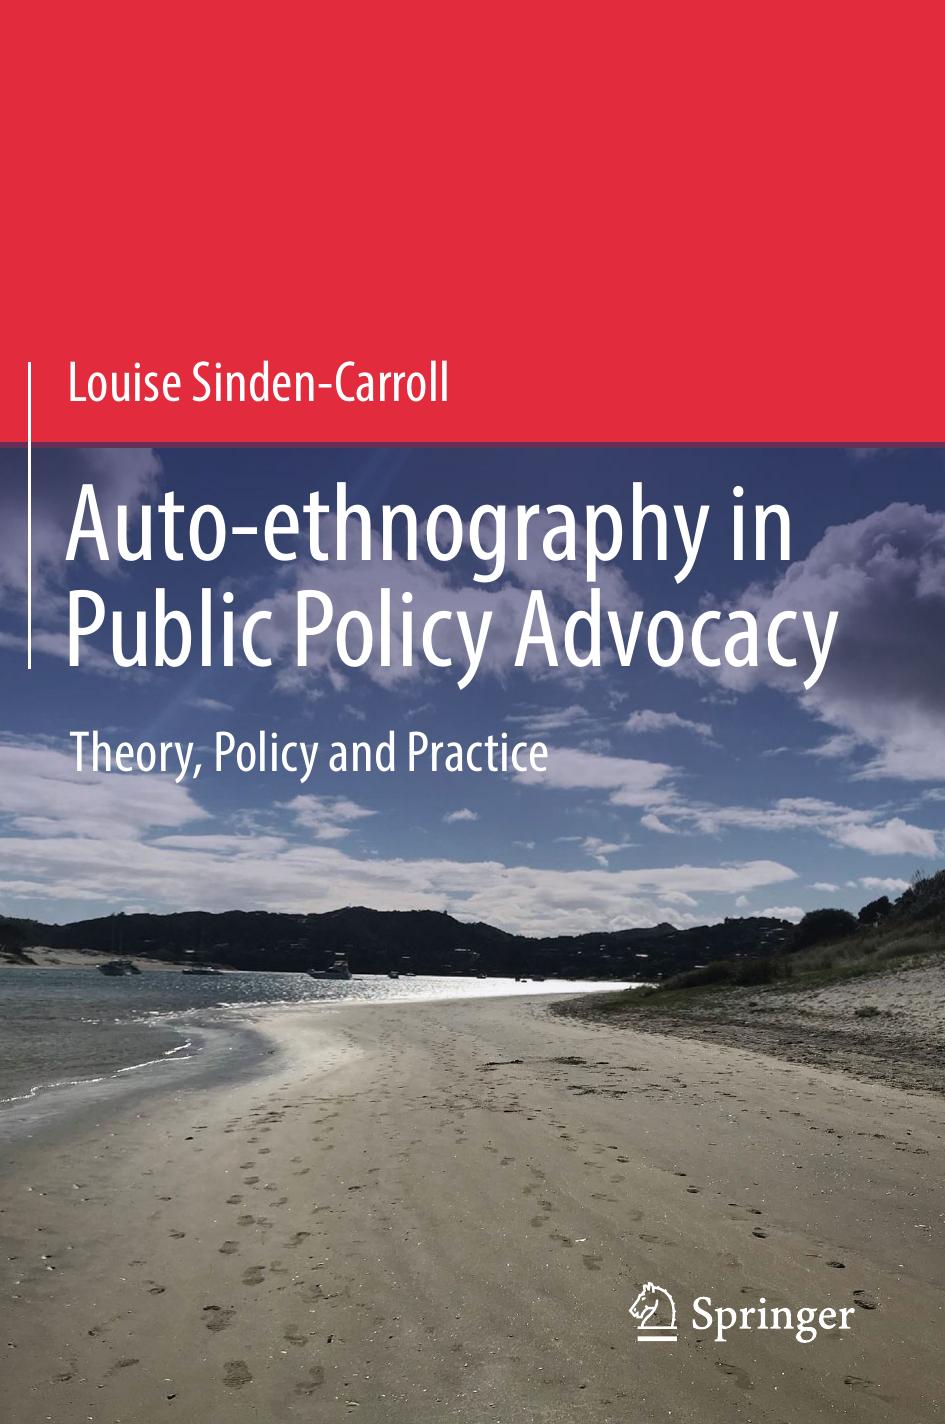 Auto-ethnography in Public Policy Advocacy by Louise Sinden-Carroll